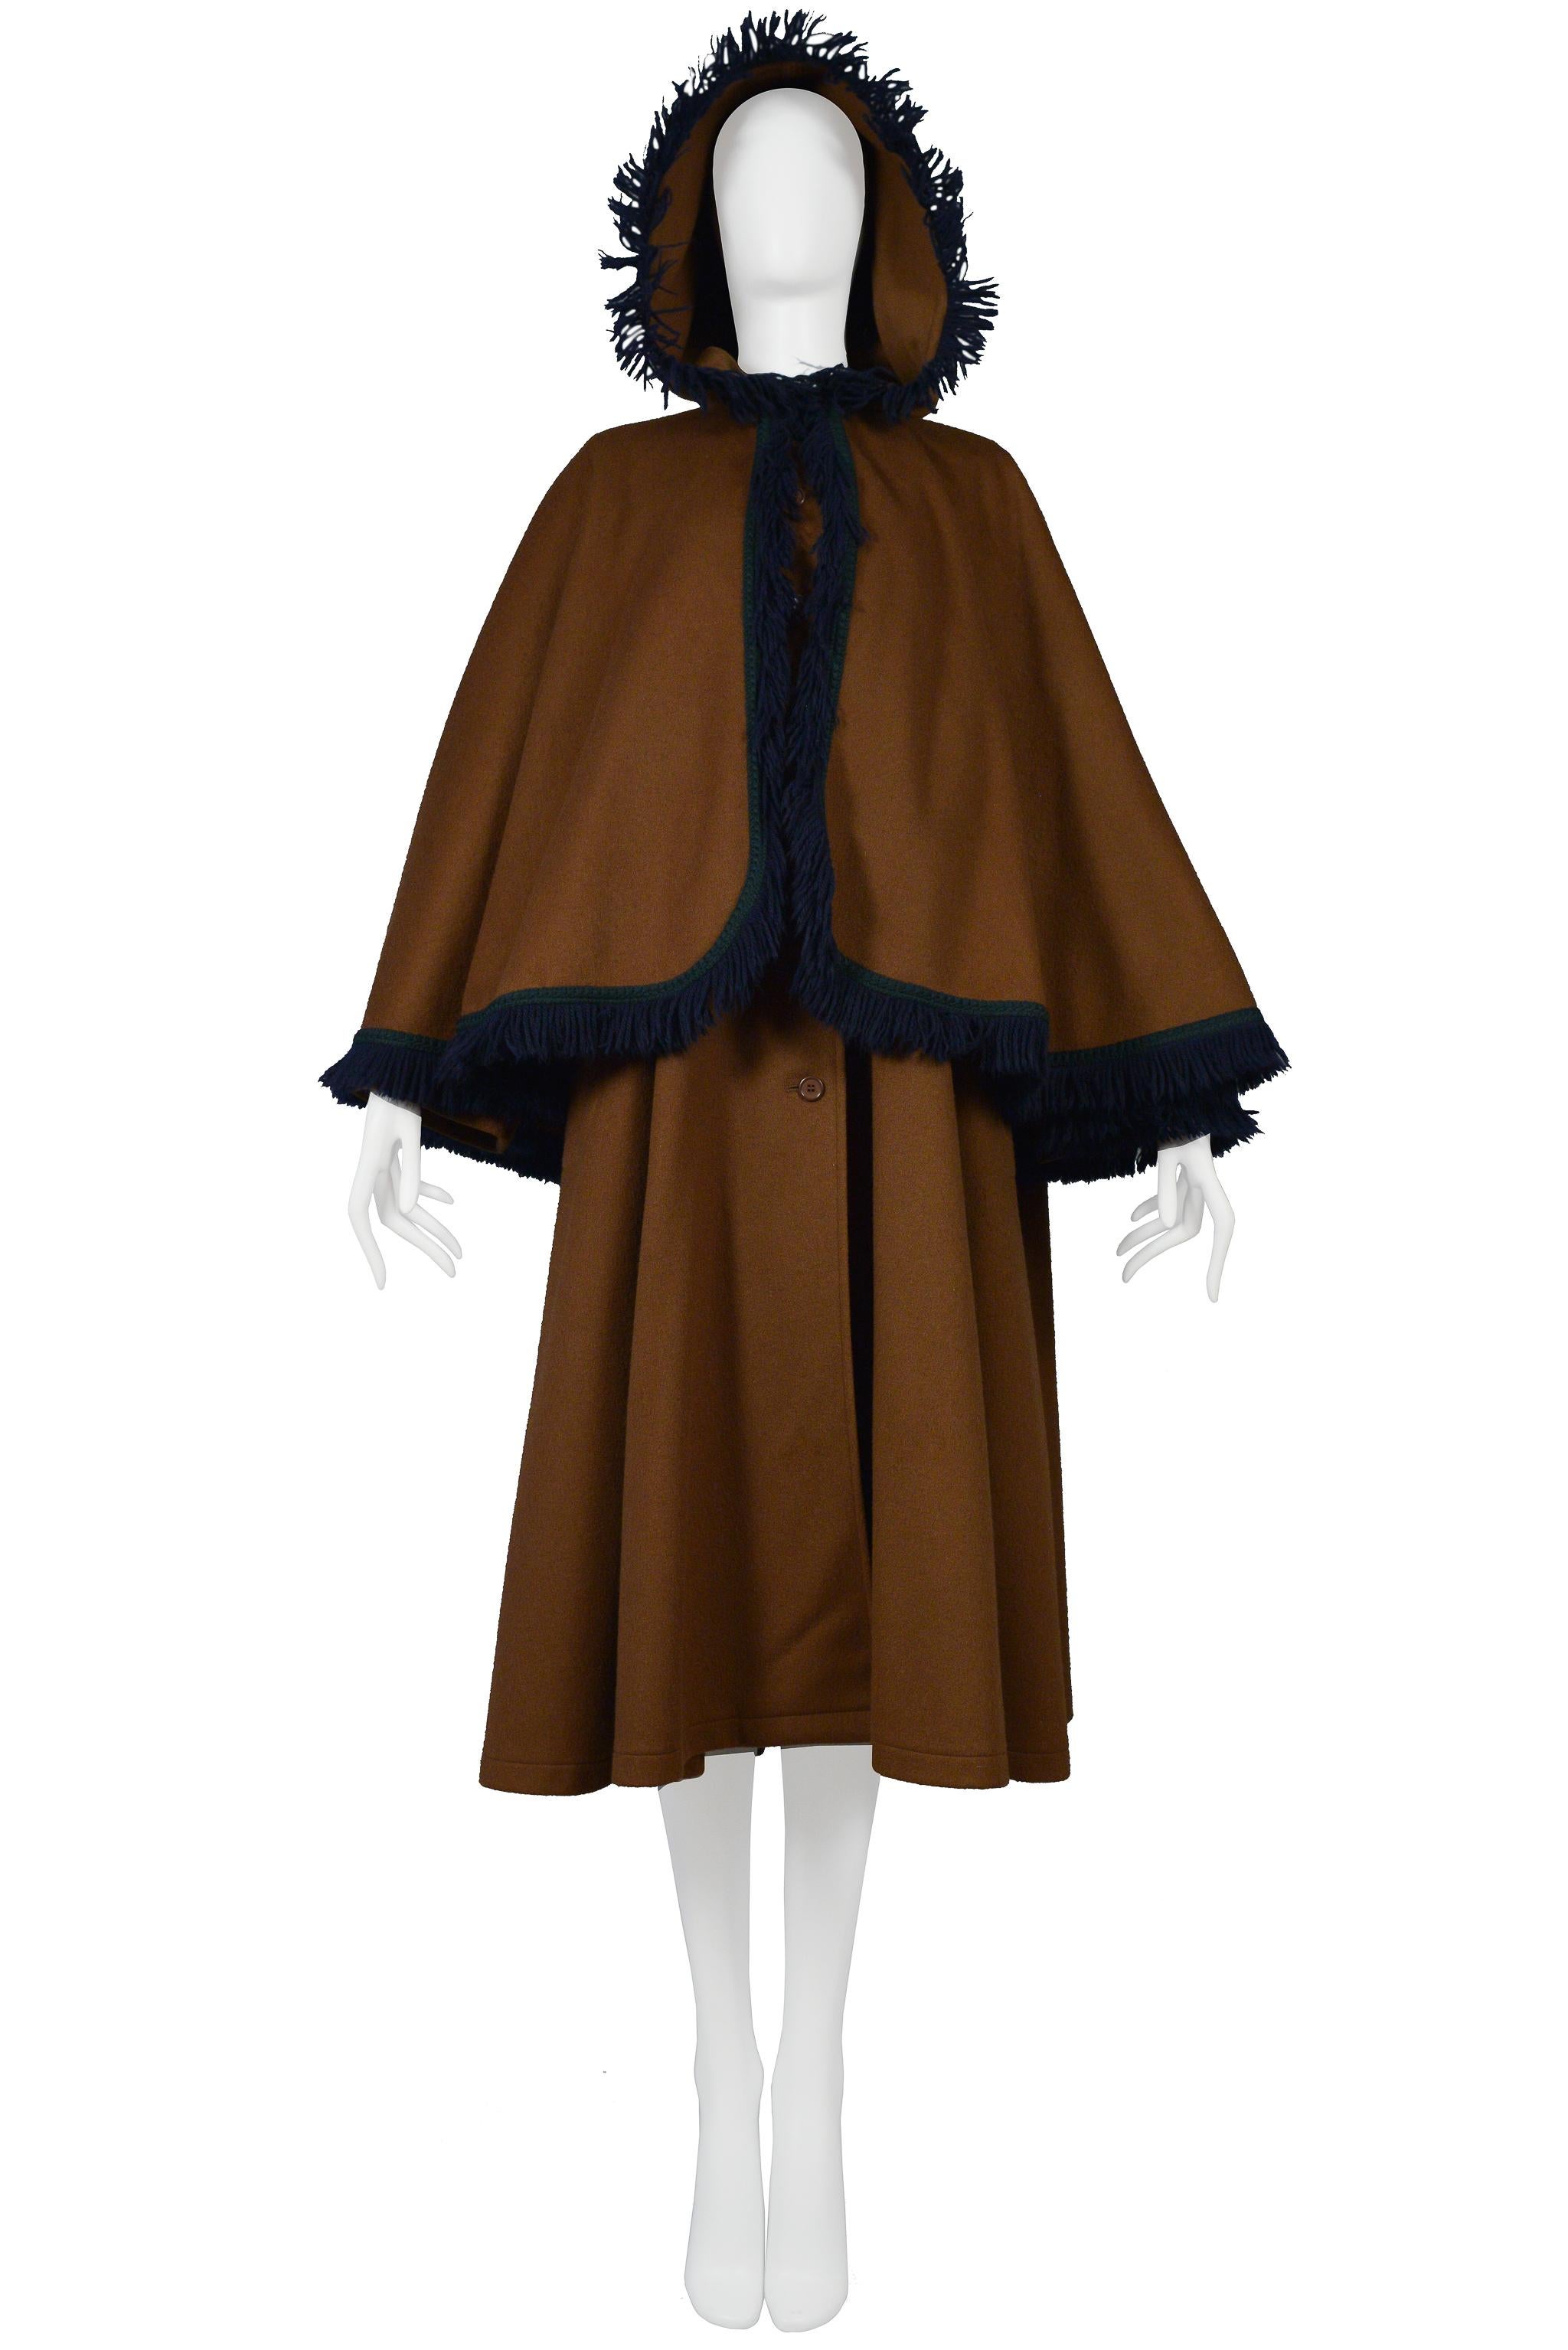 Resurrection Vintage is excited to offer a vintage Yves Saint Laurent caramel brown wool cape coat featuring an oversized hood trimmed with navy blue cotton fringe, attached capelet, hidden button front, and side pockets. 

Yves Saint Laurent
Size